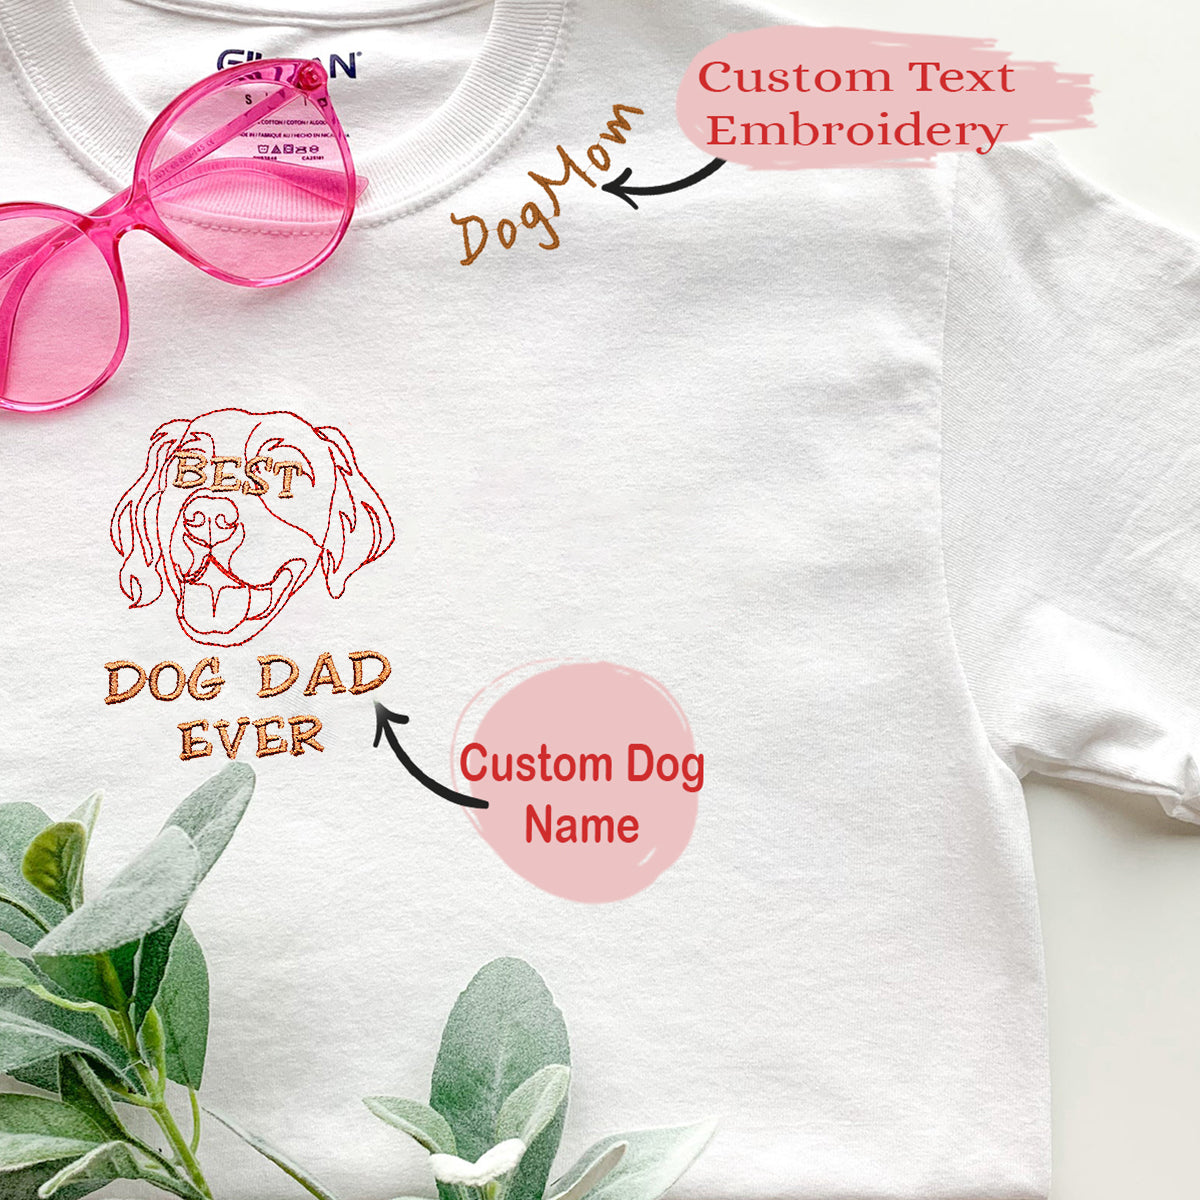 Personalized Best Golden Retriever Dog Dad Ever Embroidered Collar Shirt, Custom Shirt with Dog Name, Best Gifts for Golden Retriever Lovers